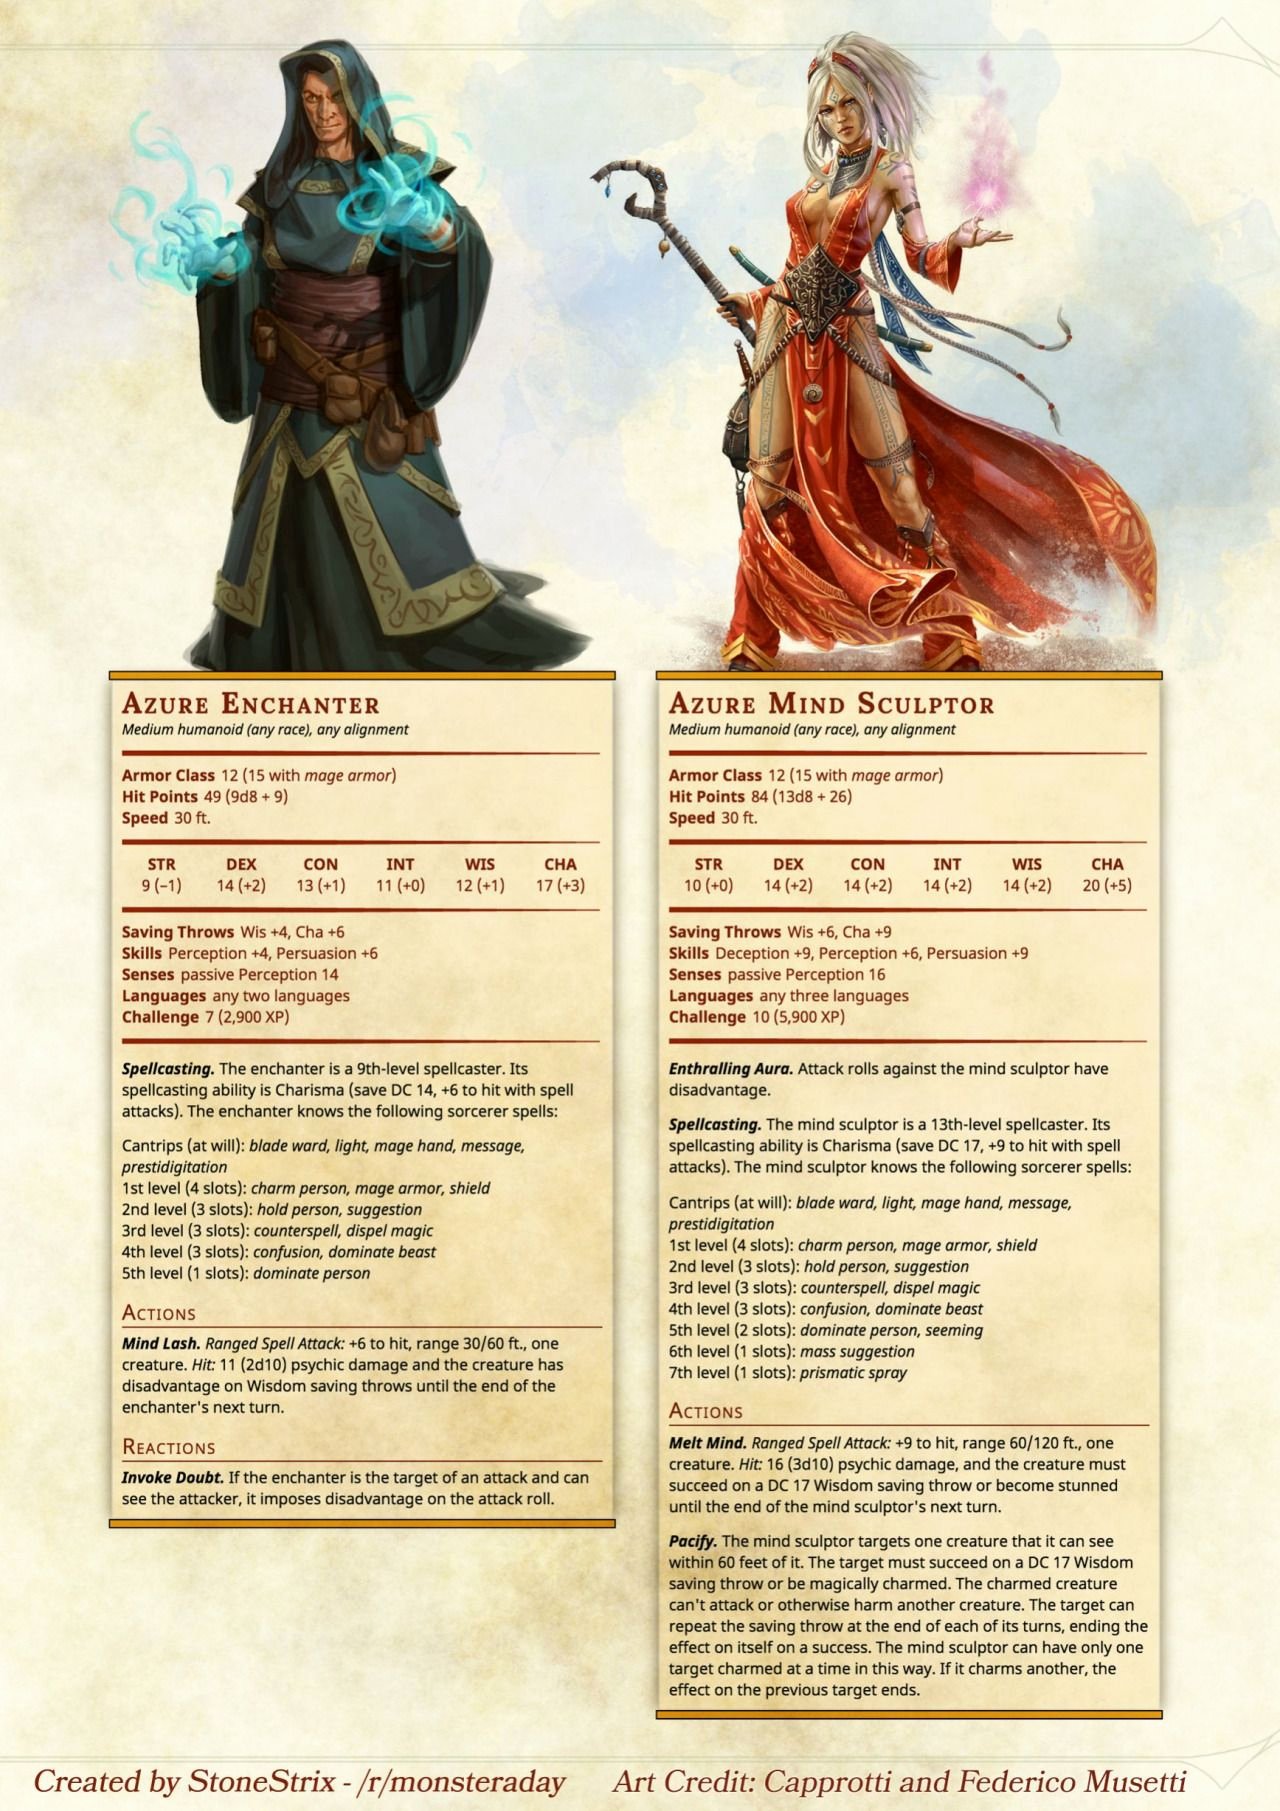 Homebrew Material for 5e Edition Dungeons and Dragons Made